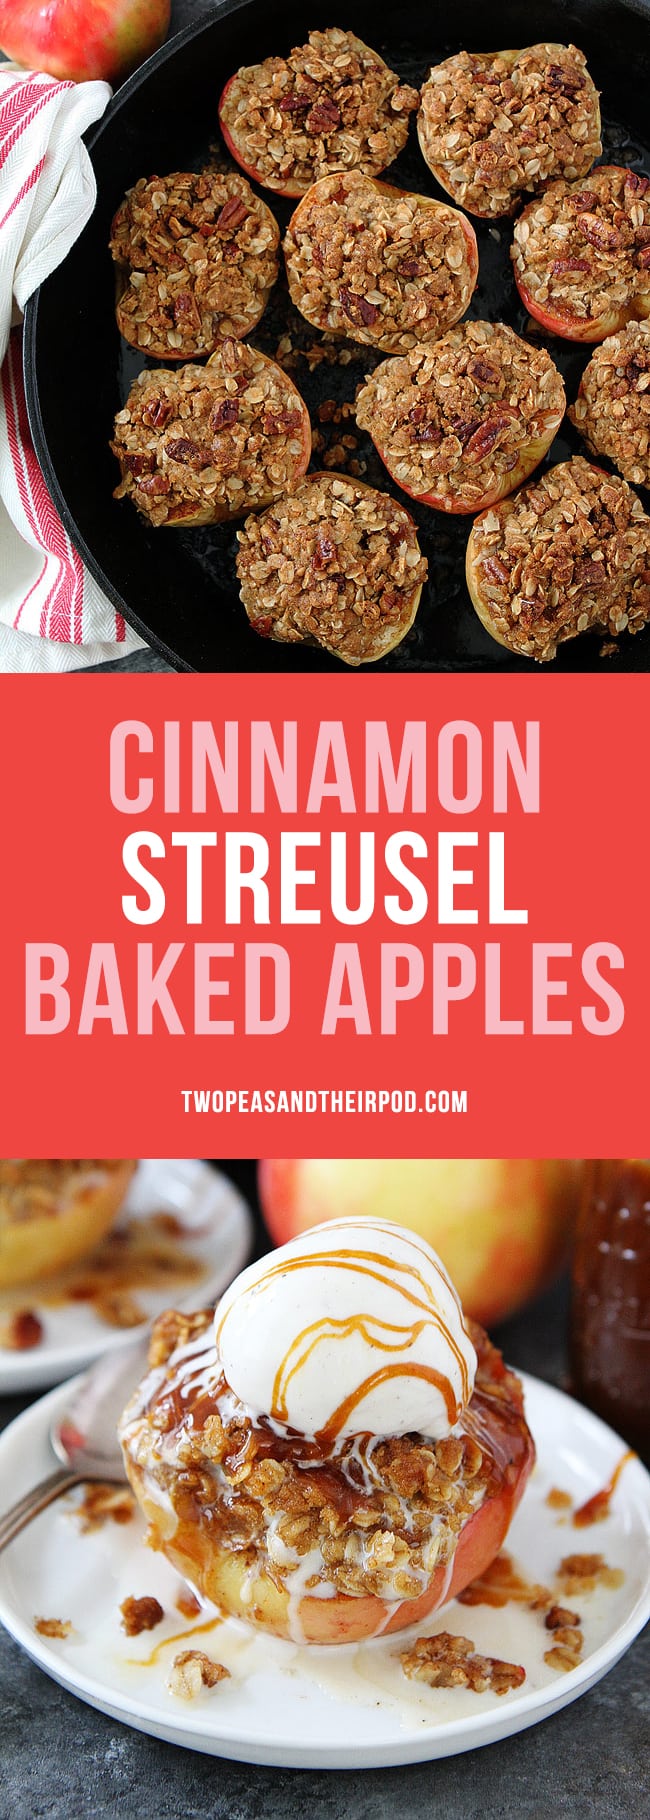 Cinnamon Streusel Baked Apples topped with vanilla ice cream are the perfect dessert for fall and Thanksgiving! #apples #bakedapples #fall #Thanksgiving #dessert